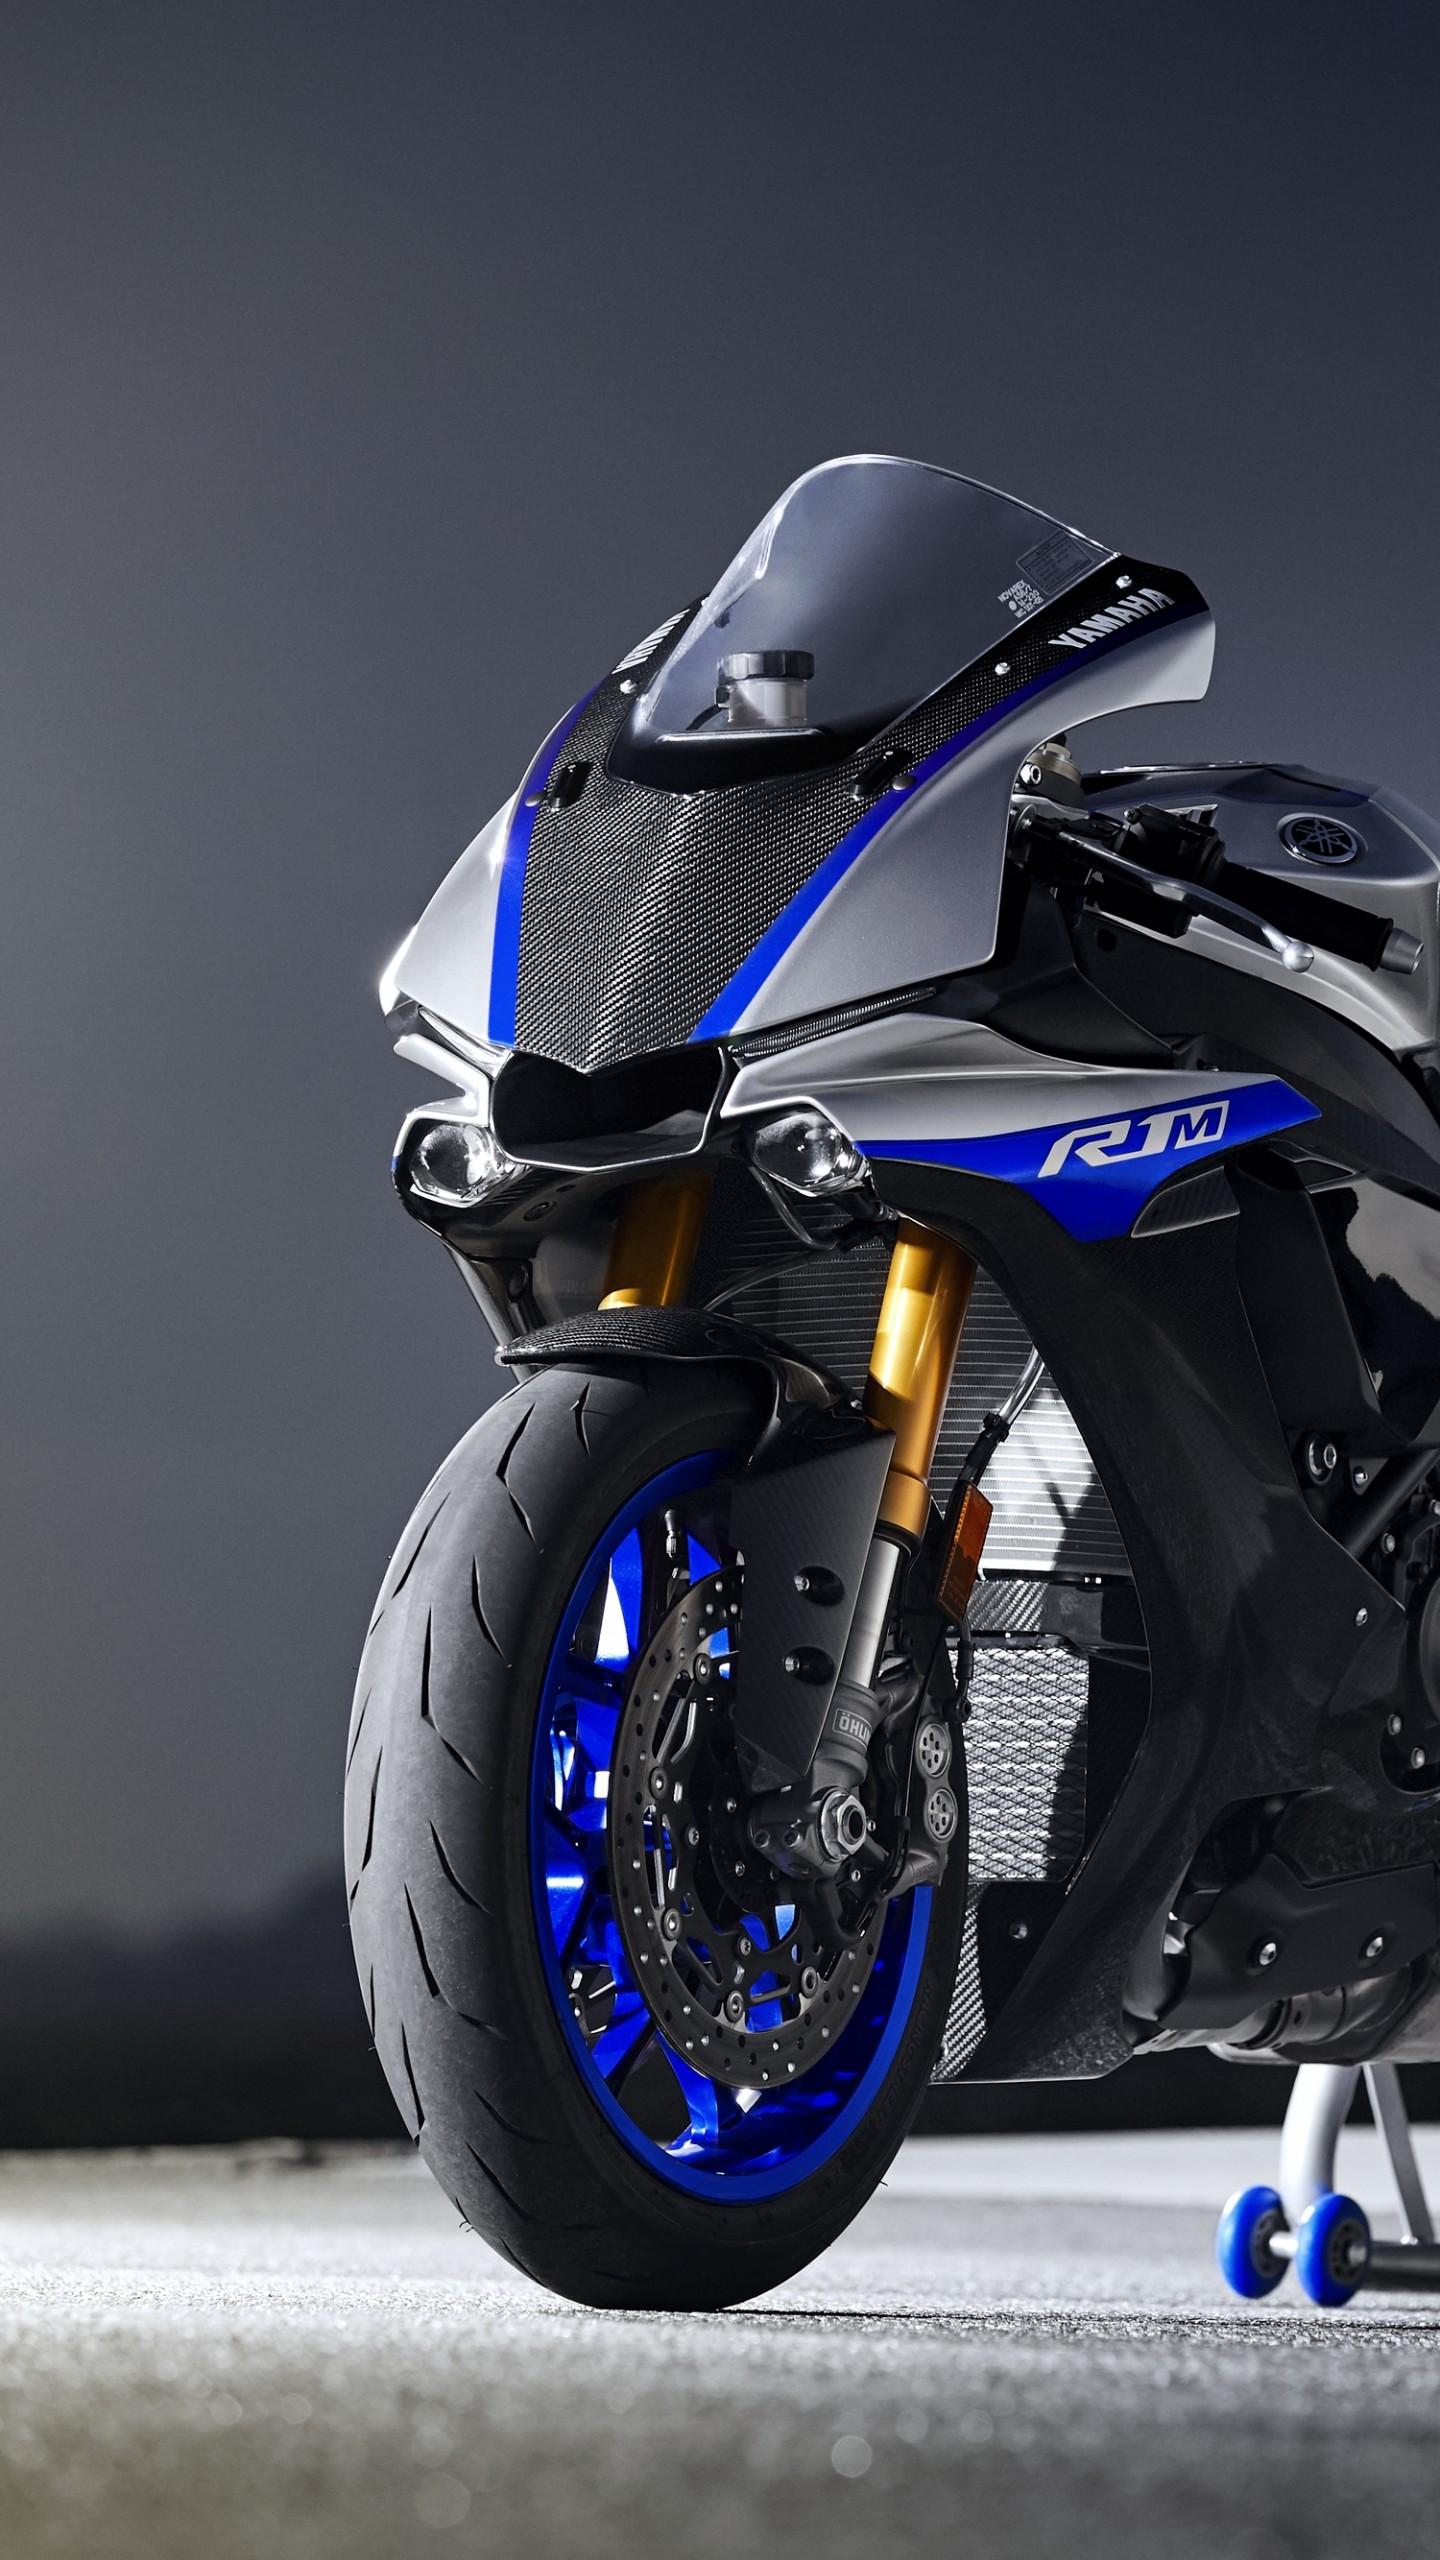 Wallpaper Yamaha YZF R1M, HD, 4K, Automotive / Bikes,. Wallpaper For IPhone, Android, Mobile And Desktop